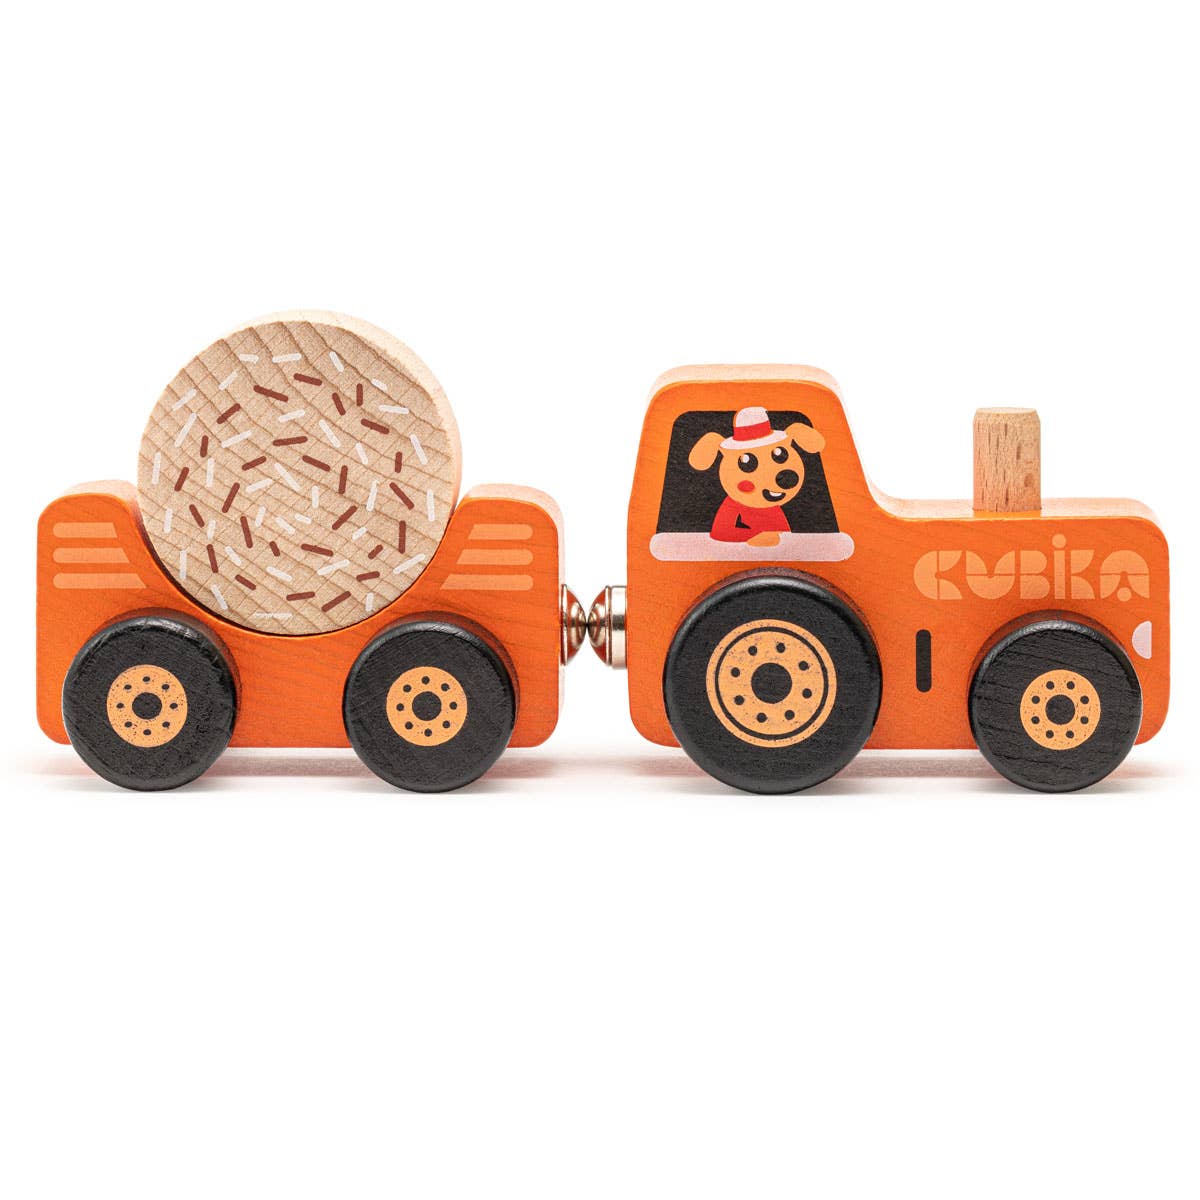 Wooden toy "Tractor"